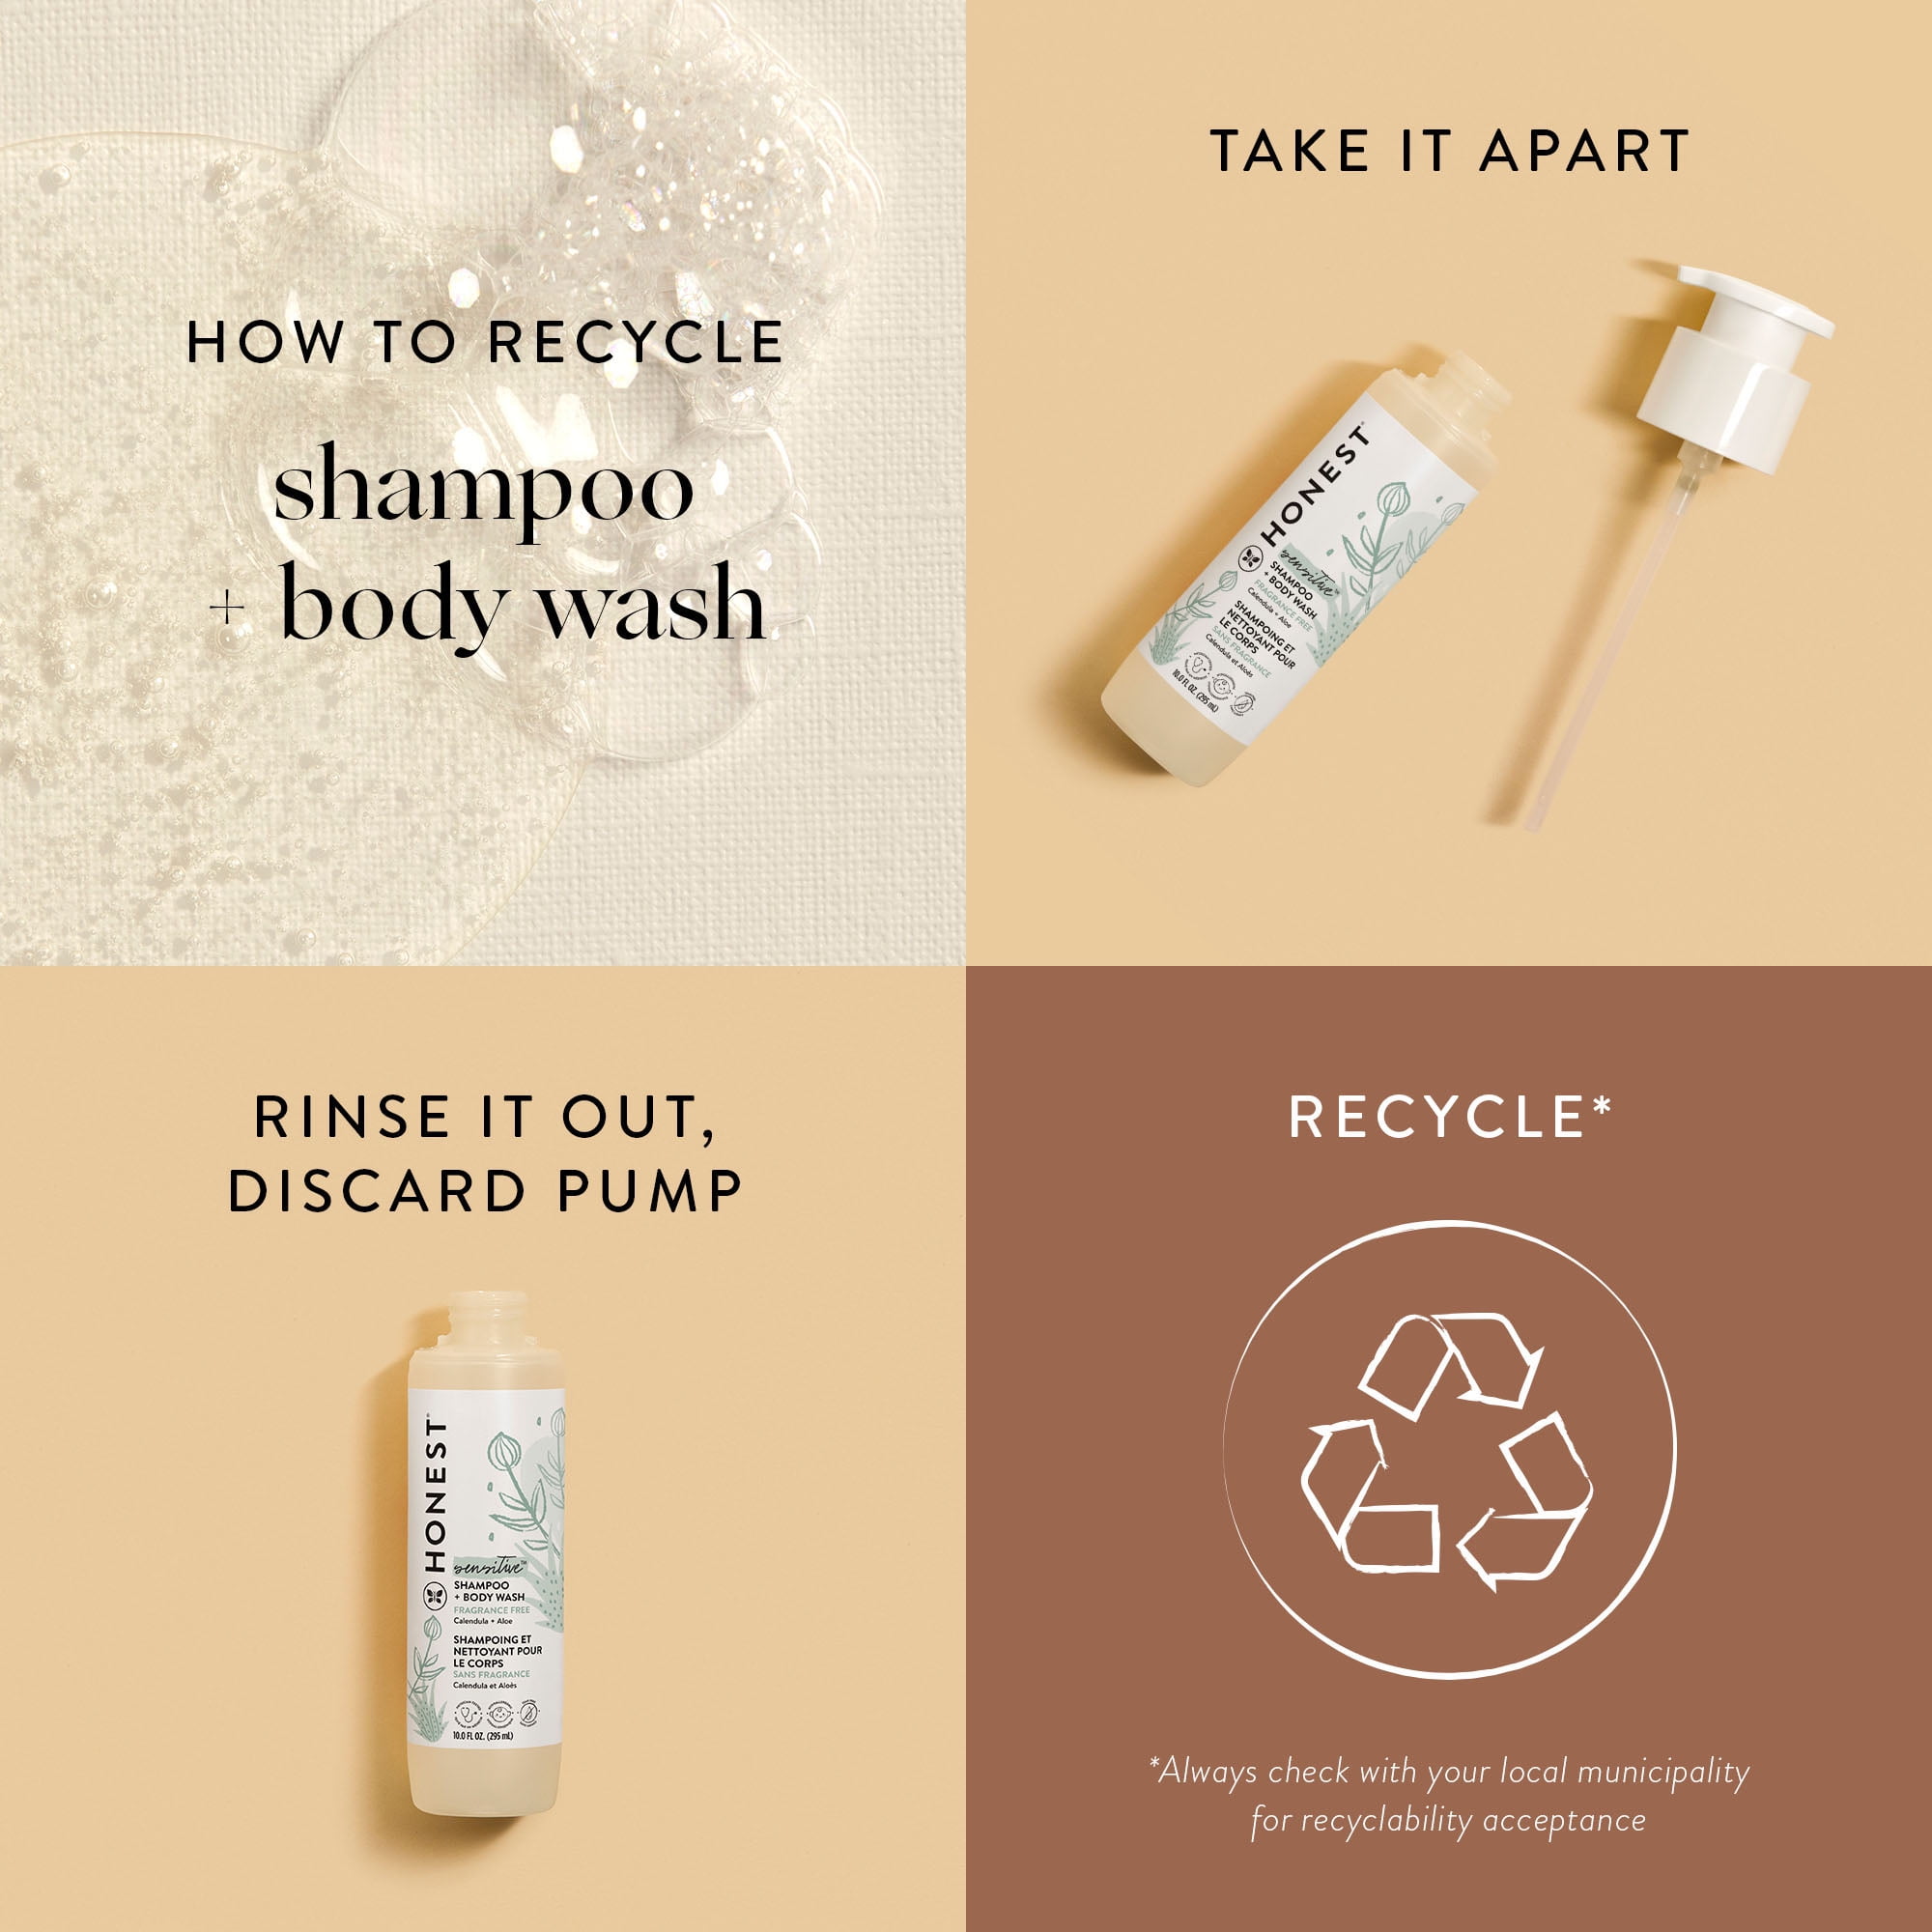 The Honest Company 2-in-1 Cleansing Shampoo + Body Wash | Gentle for Baby |  Naturally Derived, Tear-free, Hypoallergenic | Citrus Vanilla Refresh, 10